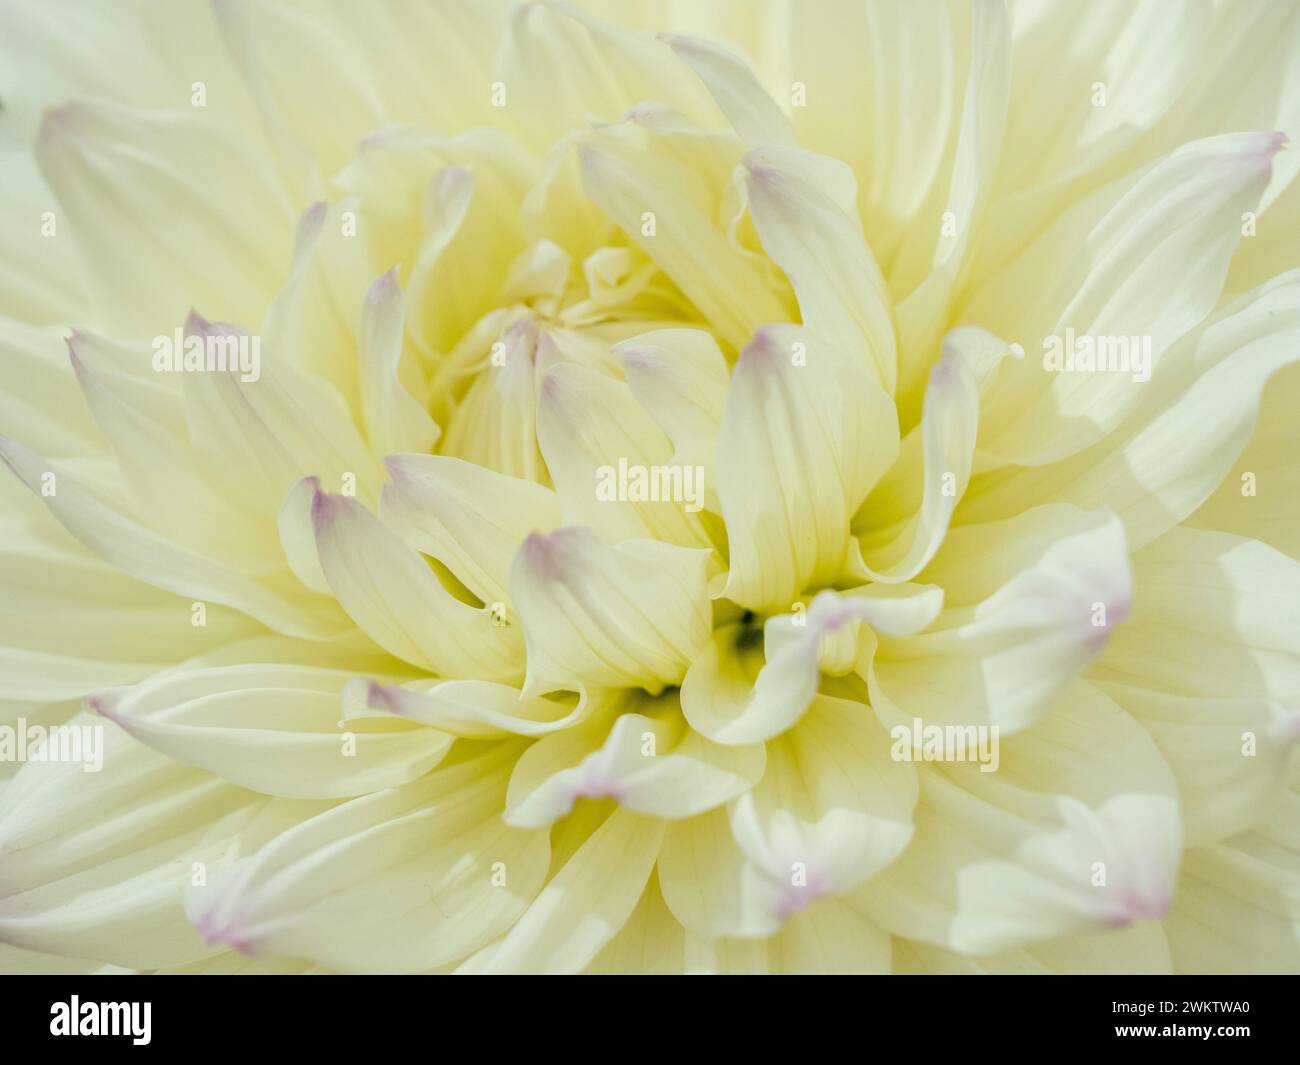 Close-up of the centre of a dahlia with white petals with pale purple tips. Stock Photo